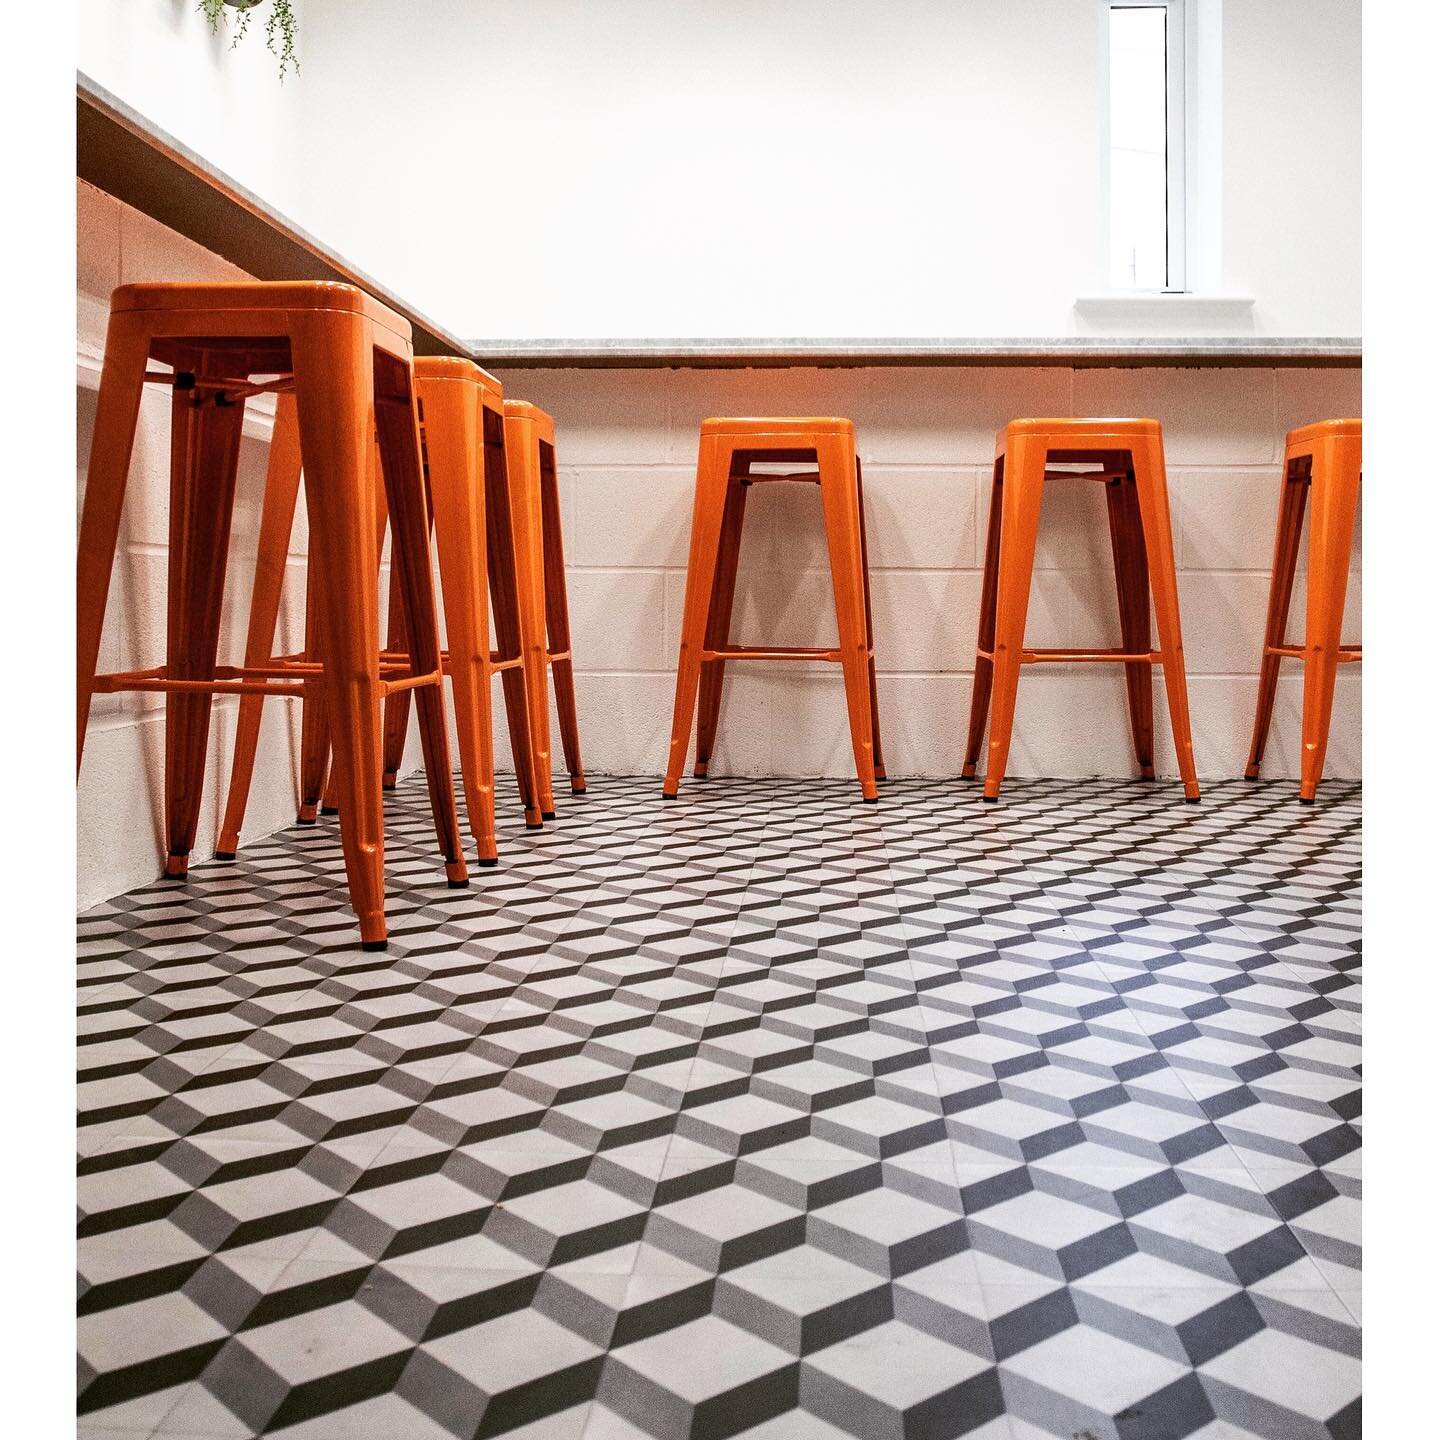 FLOORING// Fab geometric flooring from @tarkettuk with classic Tolix style stools from @cultfurniture - in the company&rsquo;s corporate colour, in this office kitchen and casual dining space.
The orange colour was throughout, linking each space and 